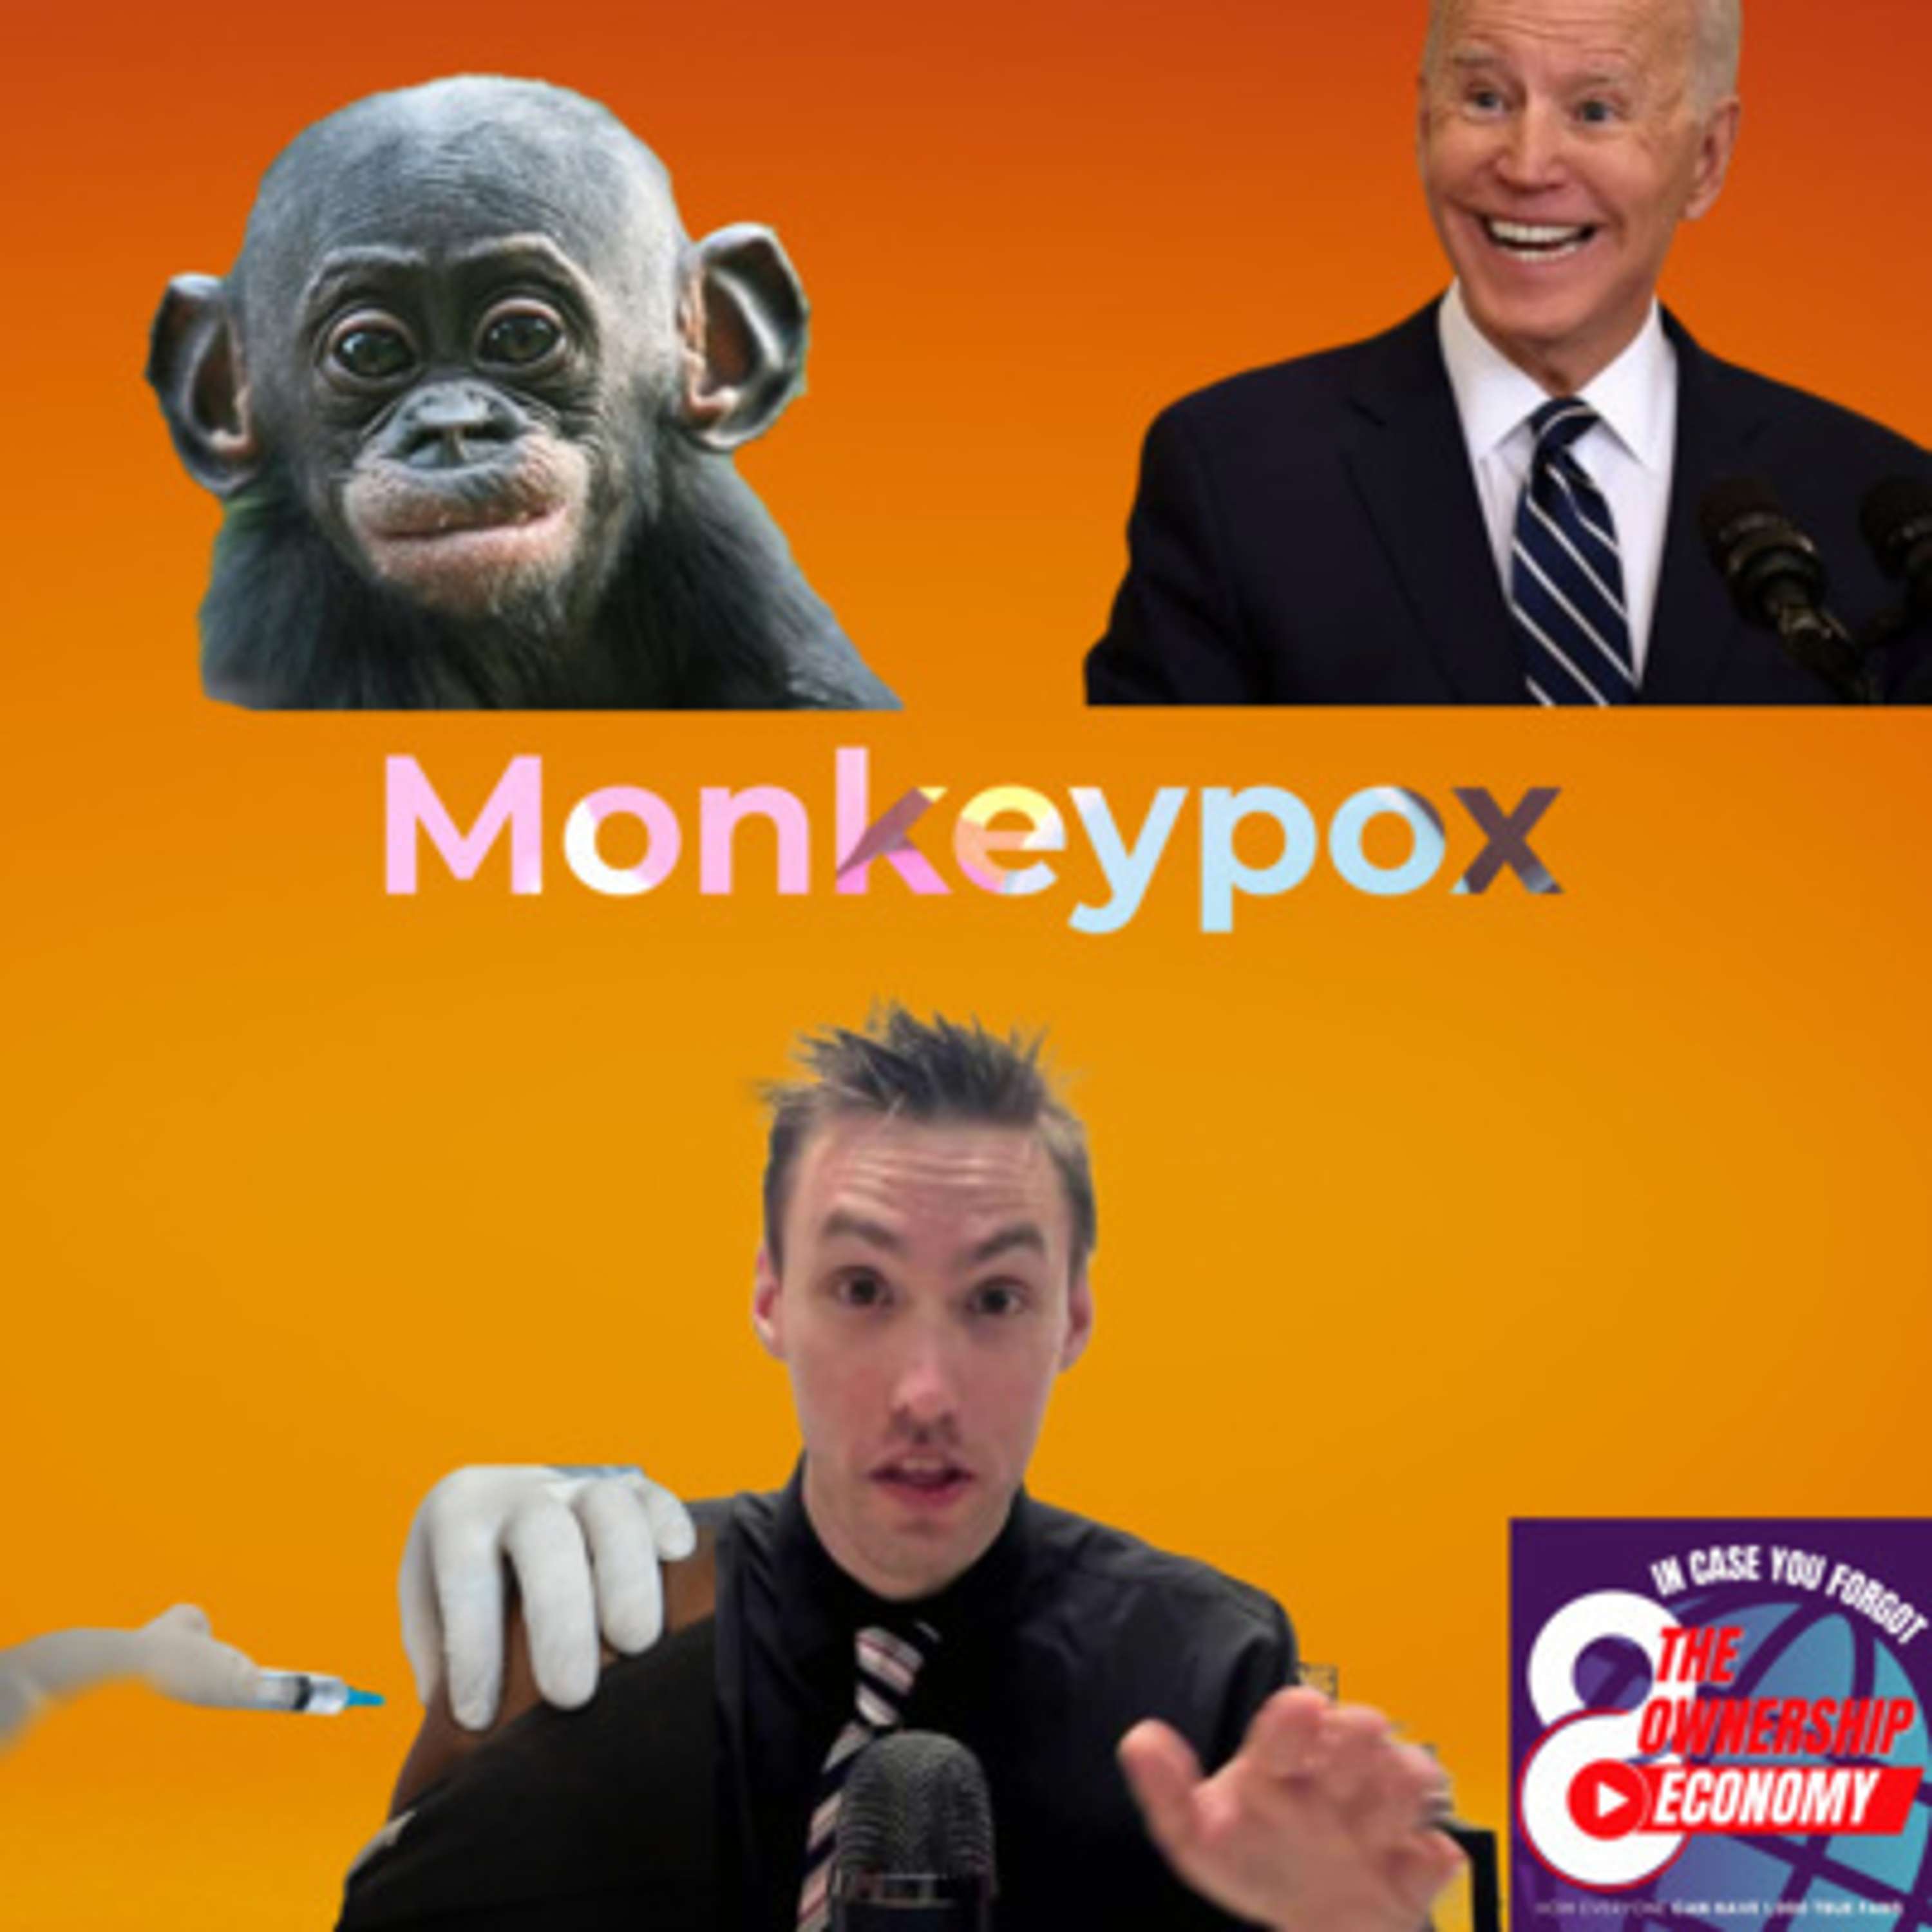 Monkeypox is the NEXT PANDEMIC and it's HERE - #17